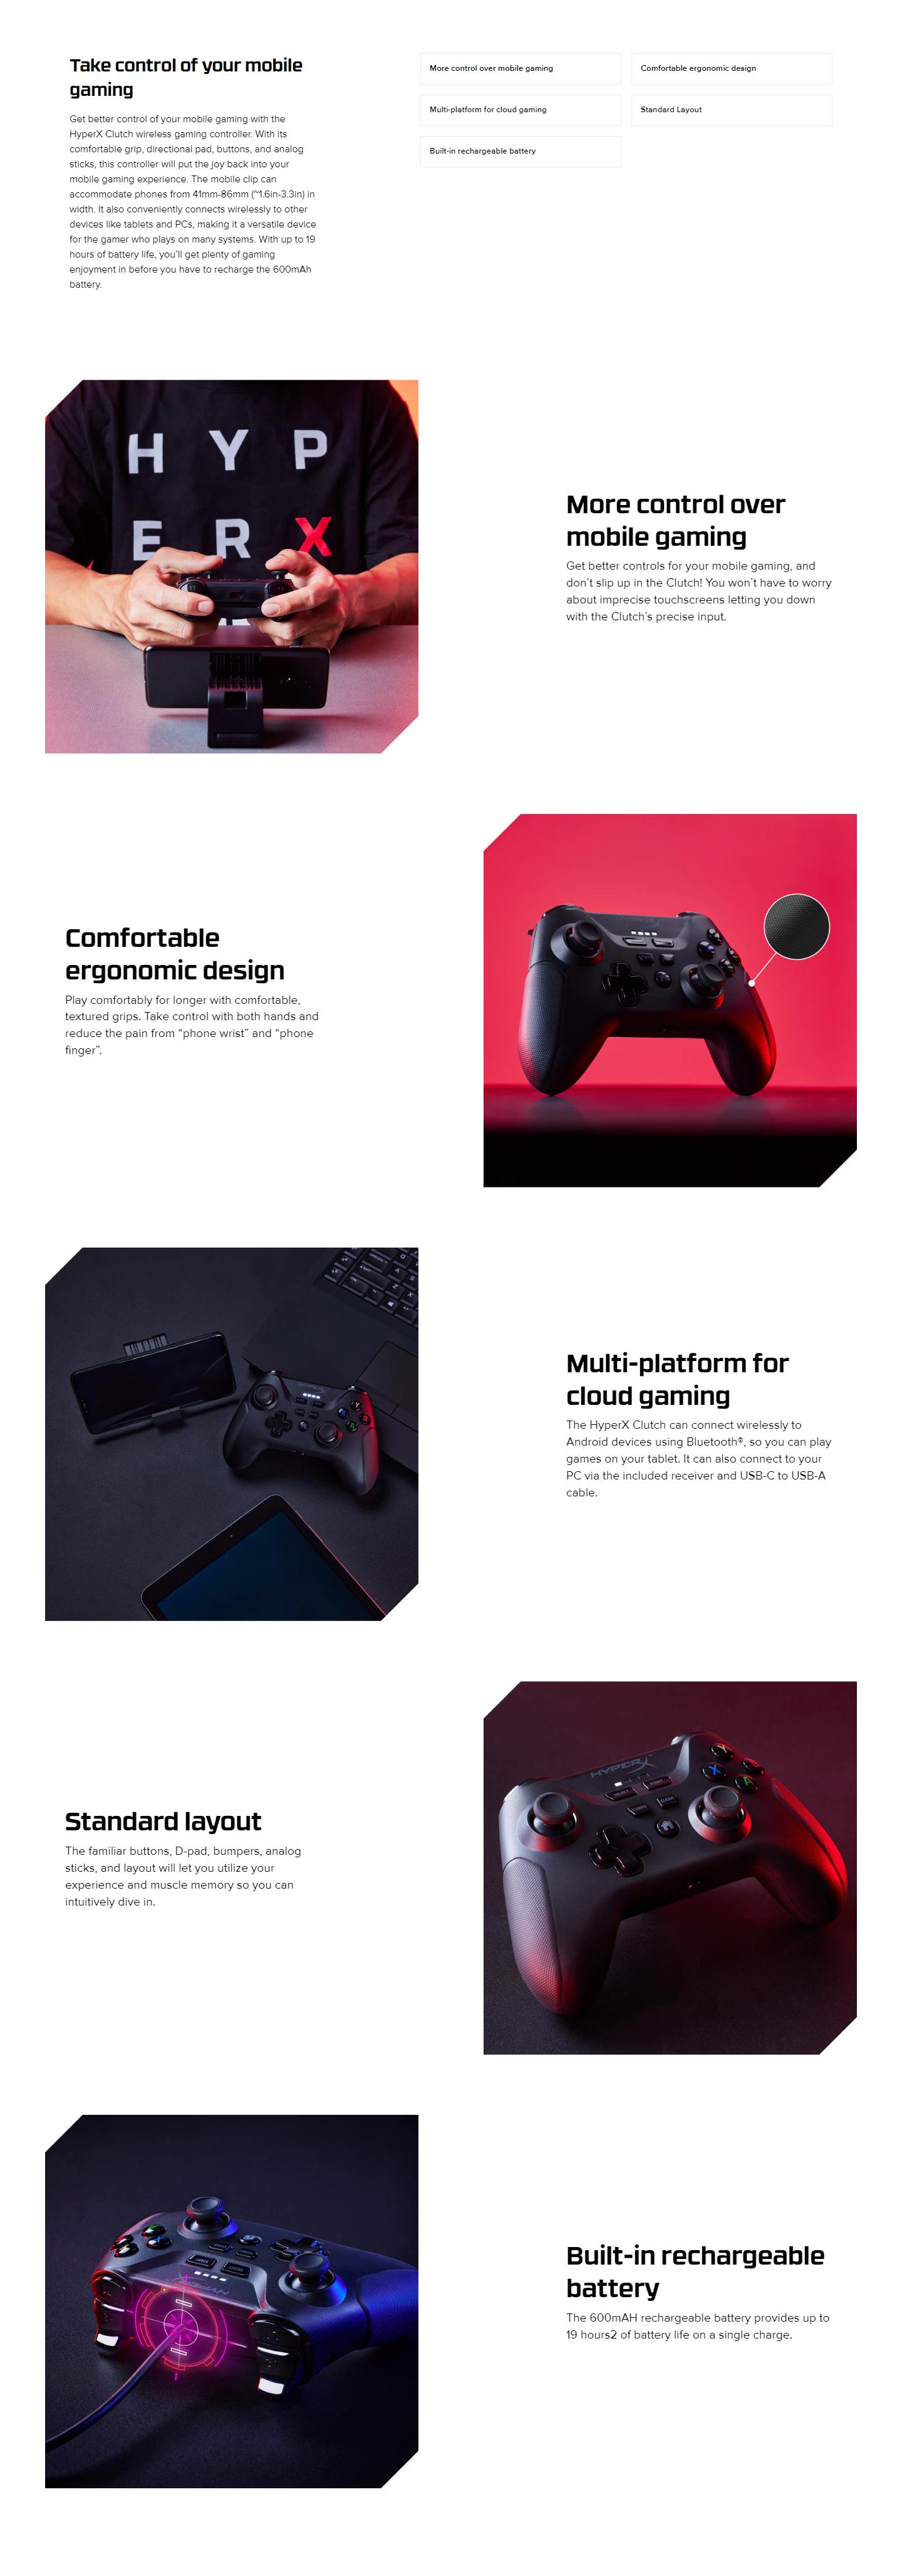 A large marketing image providing additional information about the product HyperX Clutch Wireless - Gaming Controller for Mobile & PC - Additional alt info not provided